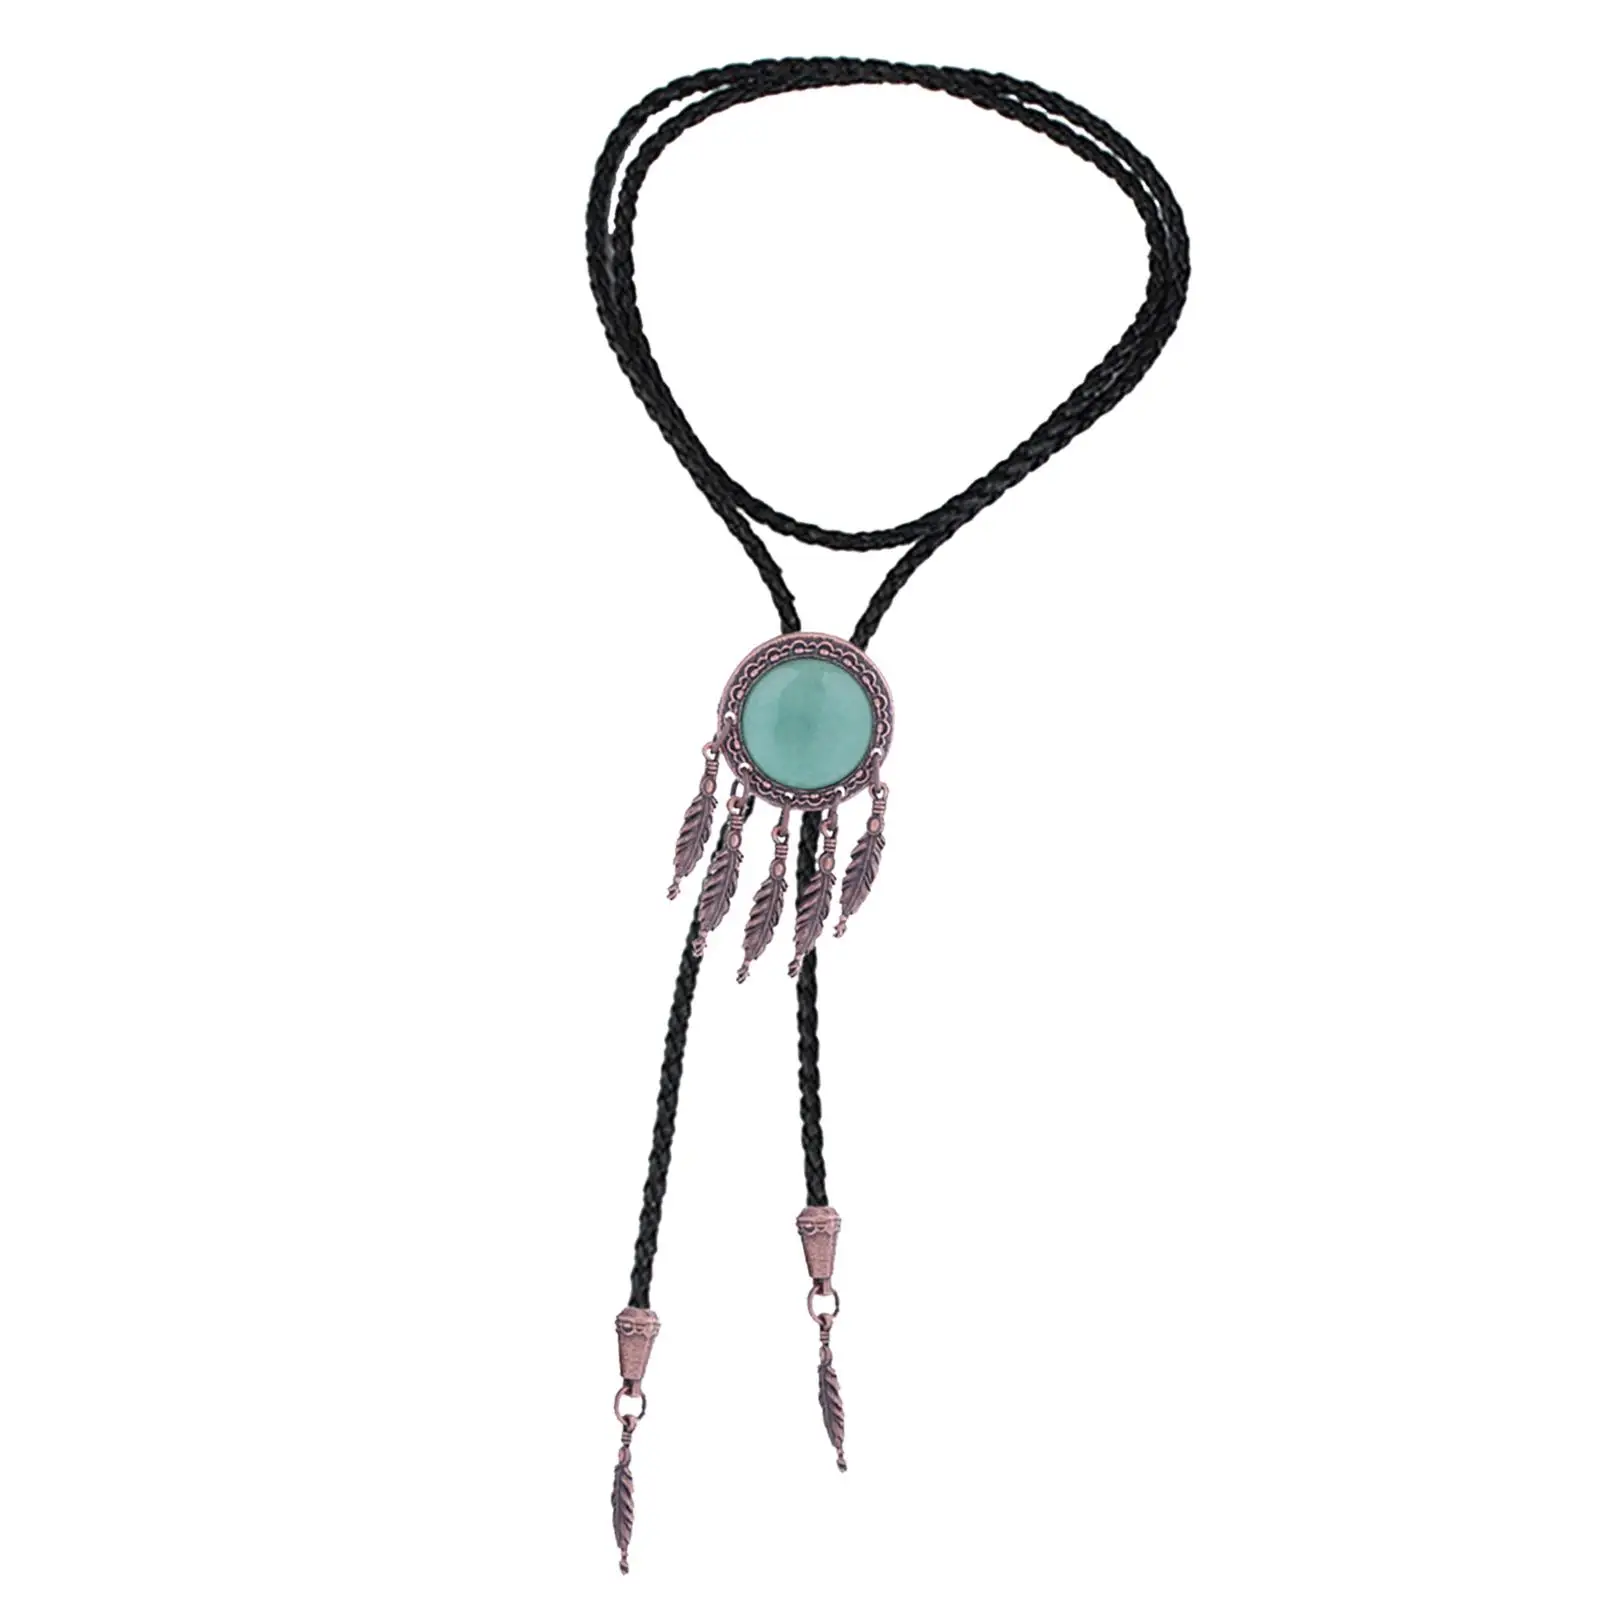 PU Leather Bolo Tie Costume Costume Accessories Cowboy Adjustable for Women